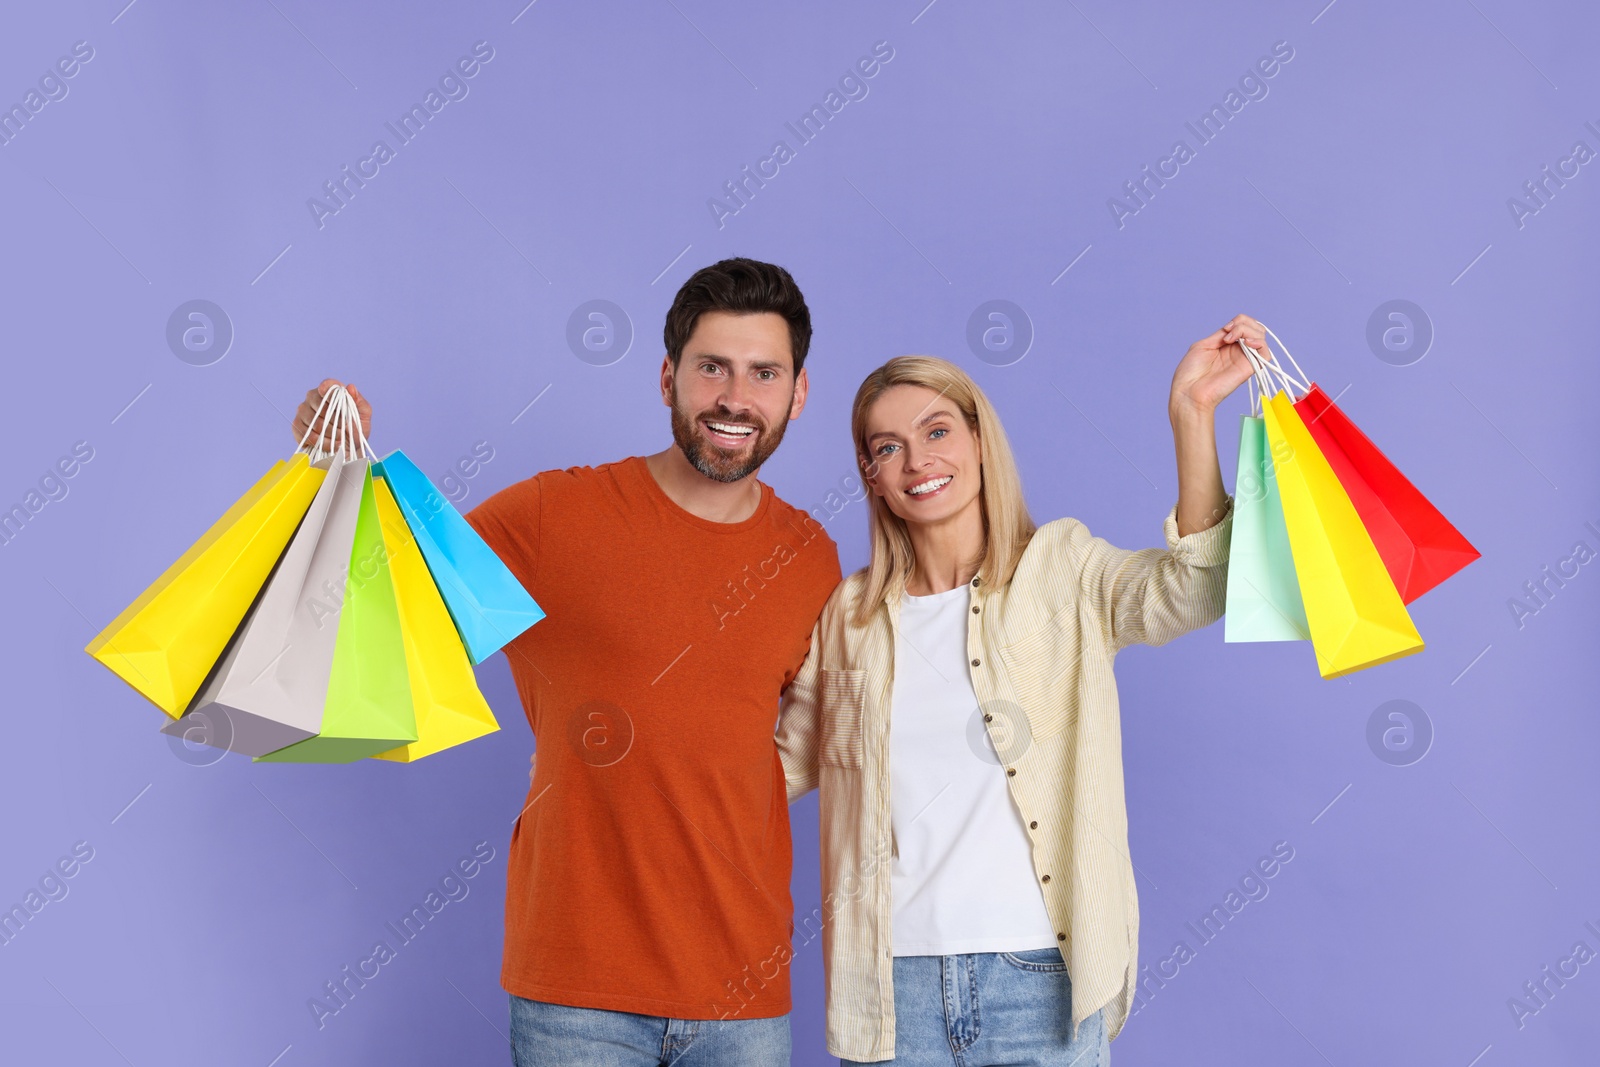 Photo of Family shopping. Happy couple with many colorful bags on violet background